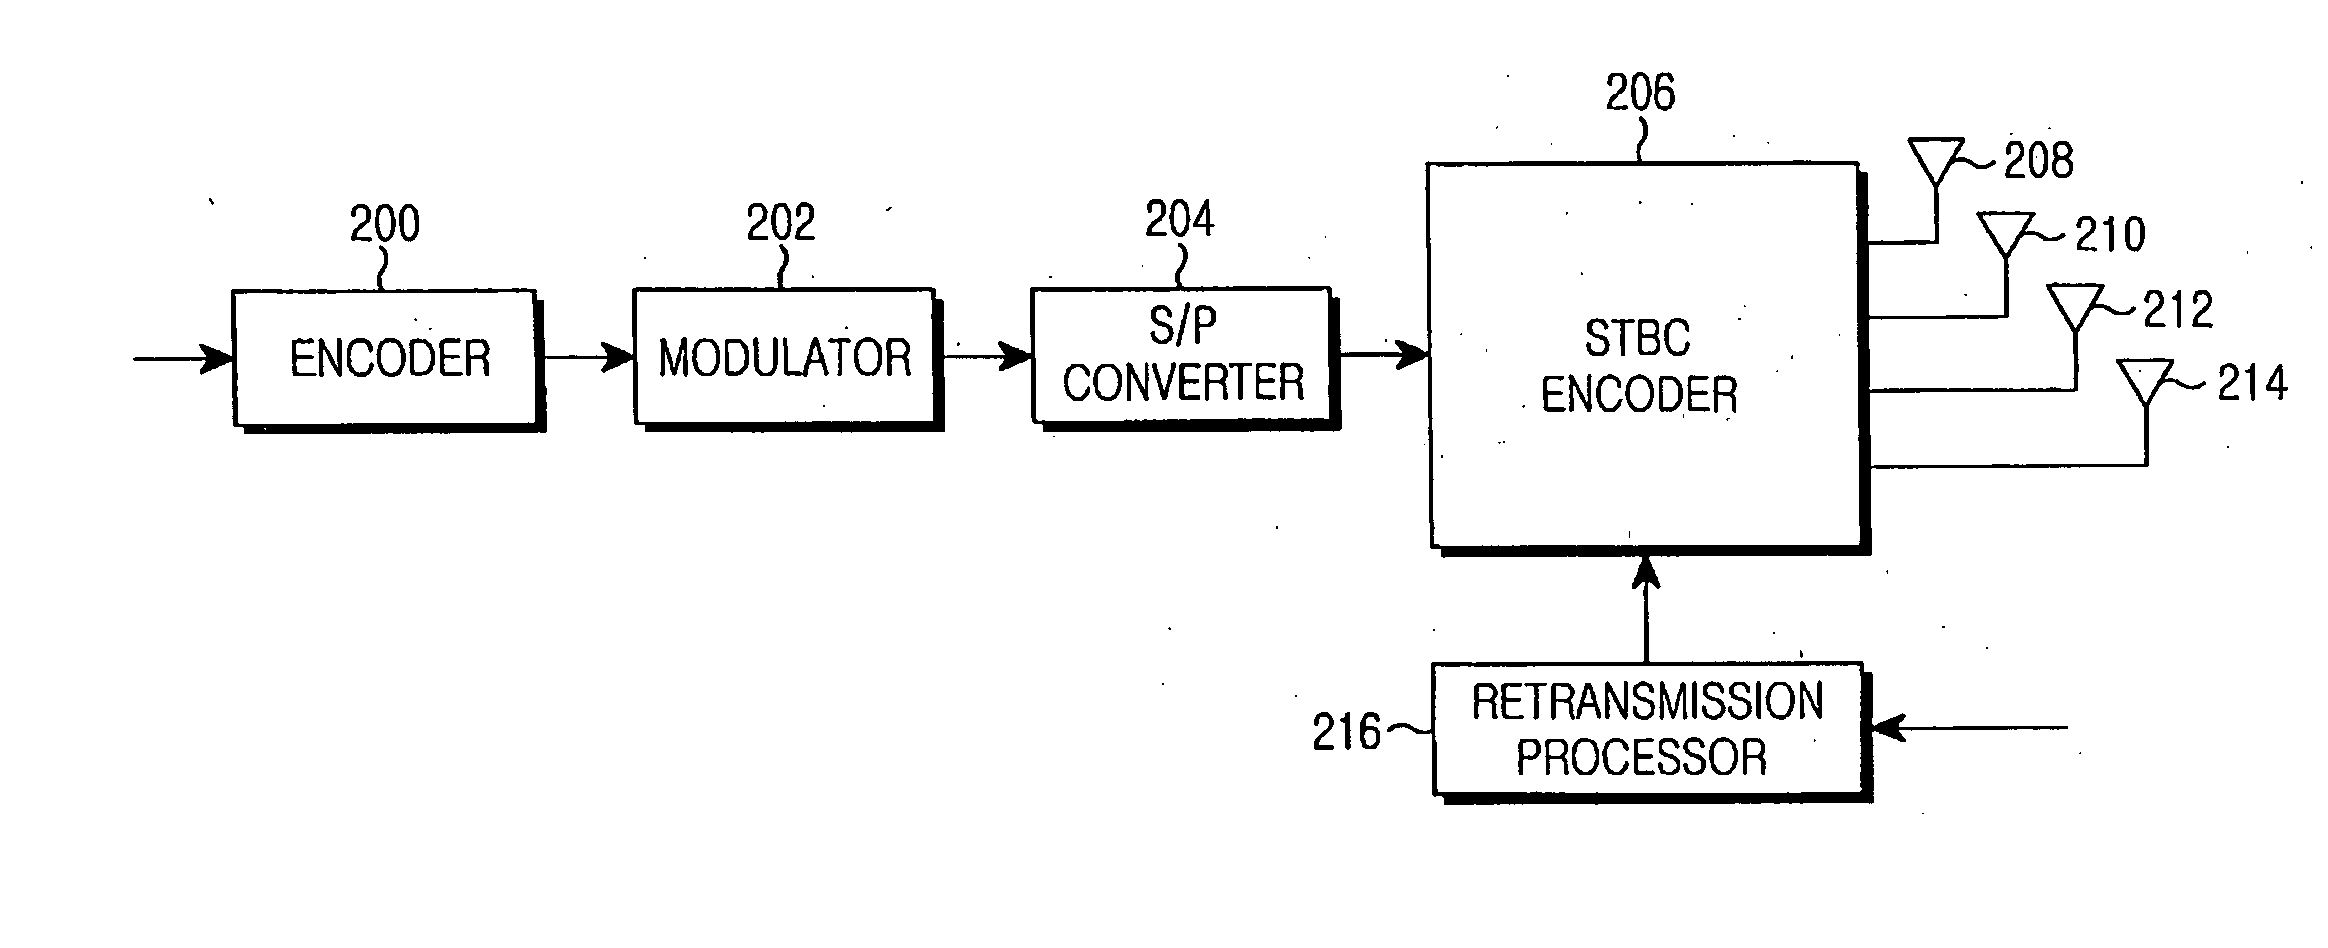 Multiple antenna communication system using automatic repeat request error correction scheme